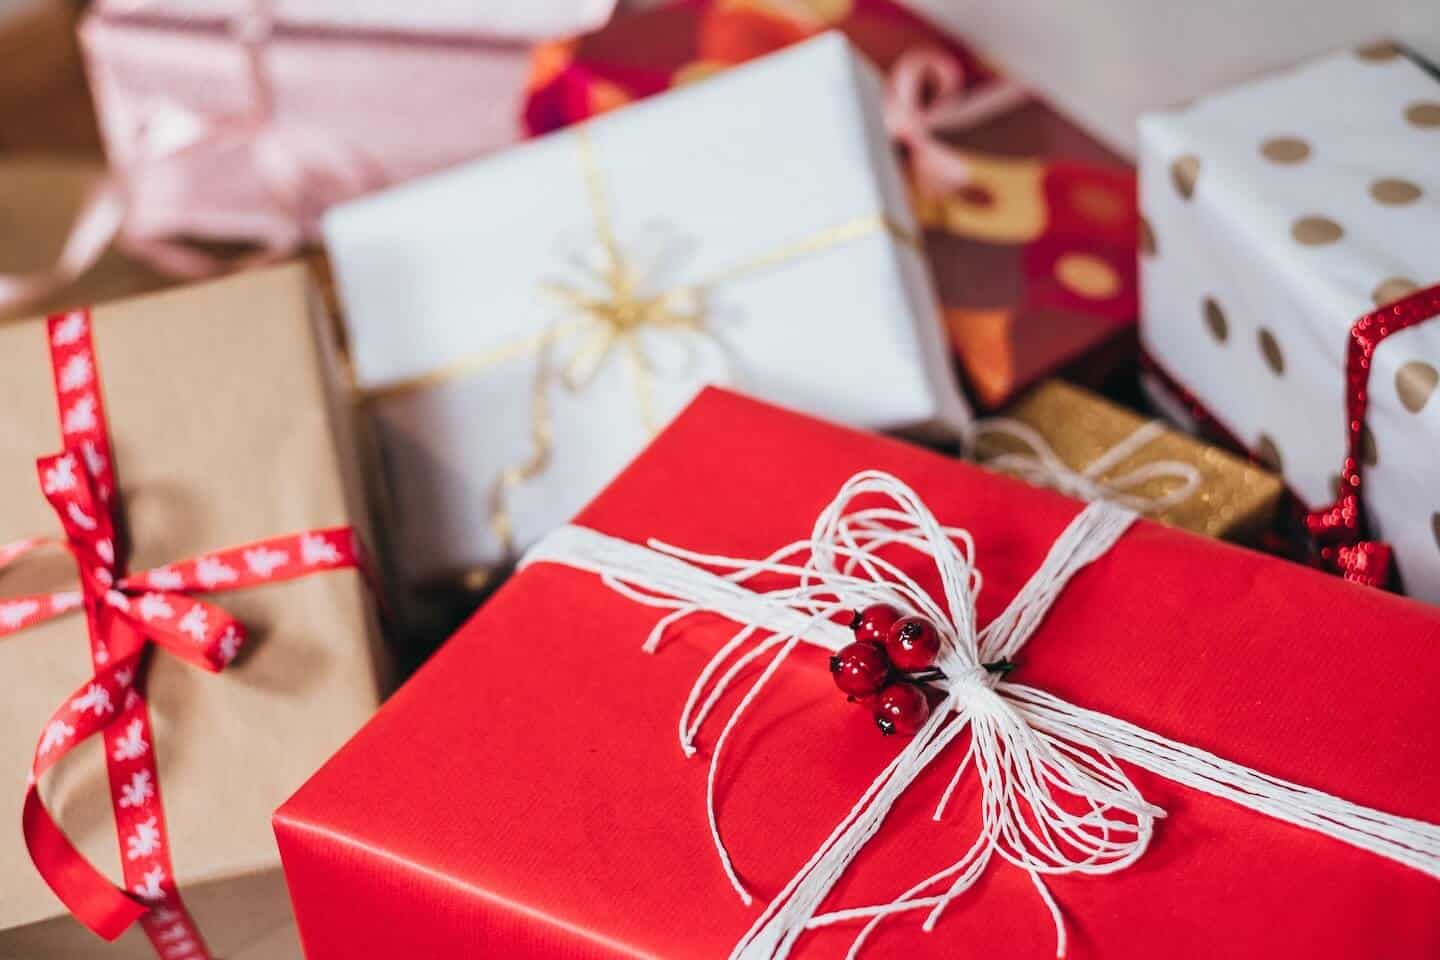 Several wrapped gift boxes in red, white, and brown wrapping paper and ribbons.